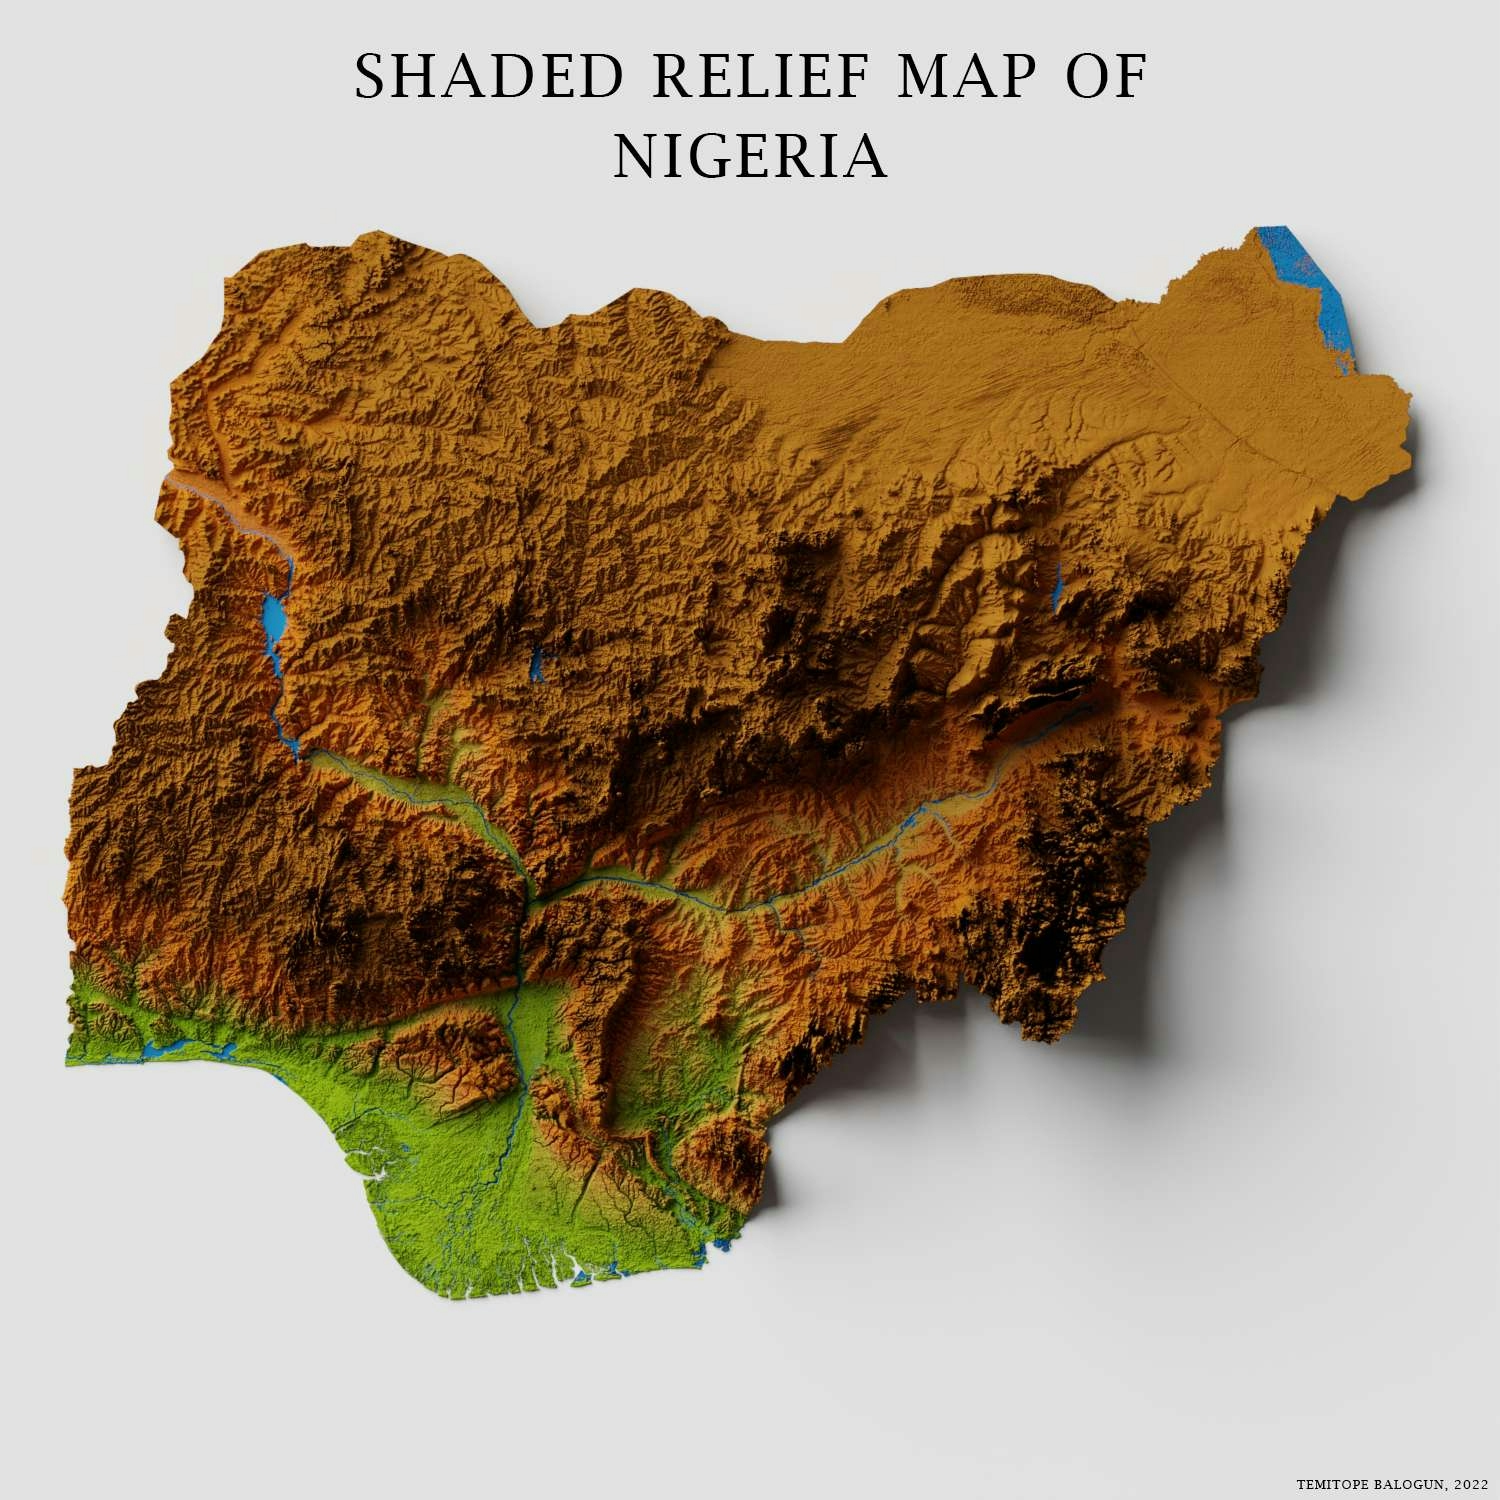 Shaded relief map of Nigeria